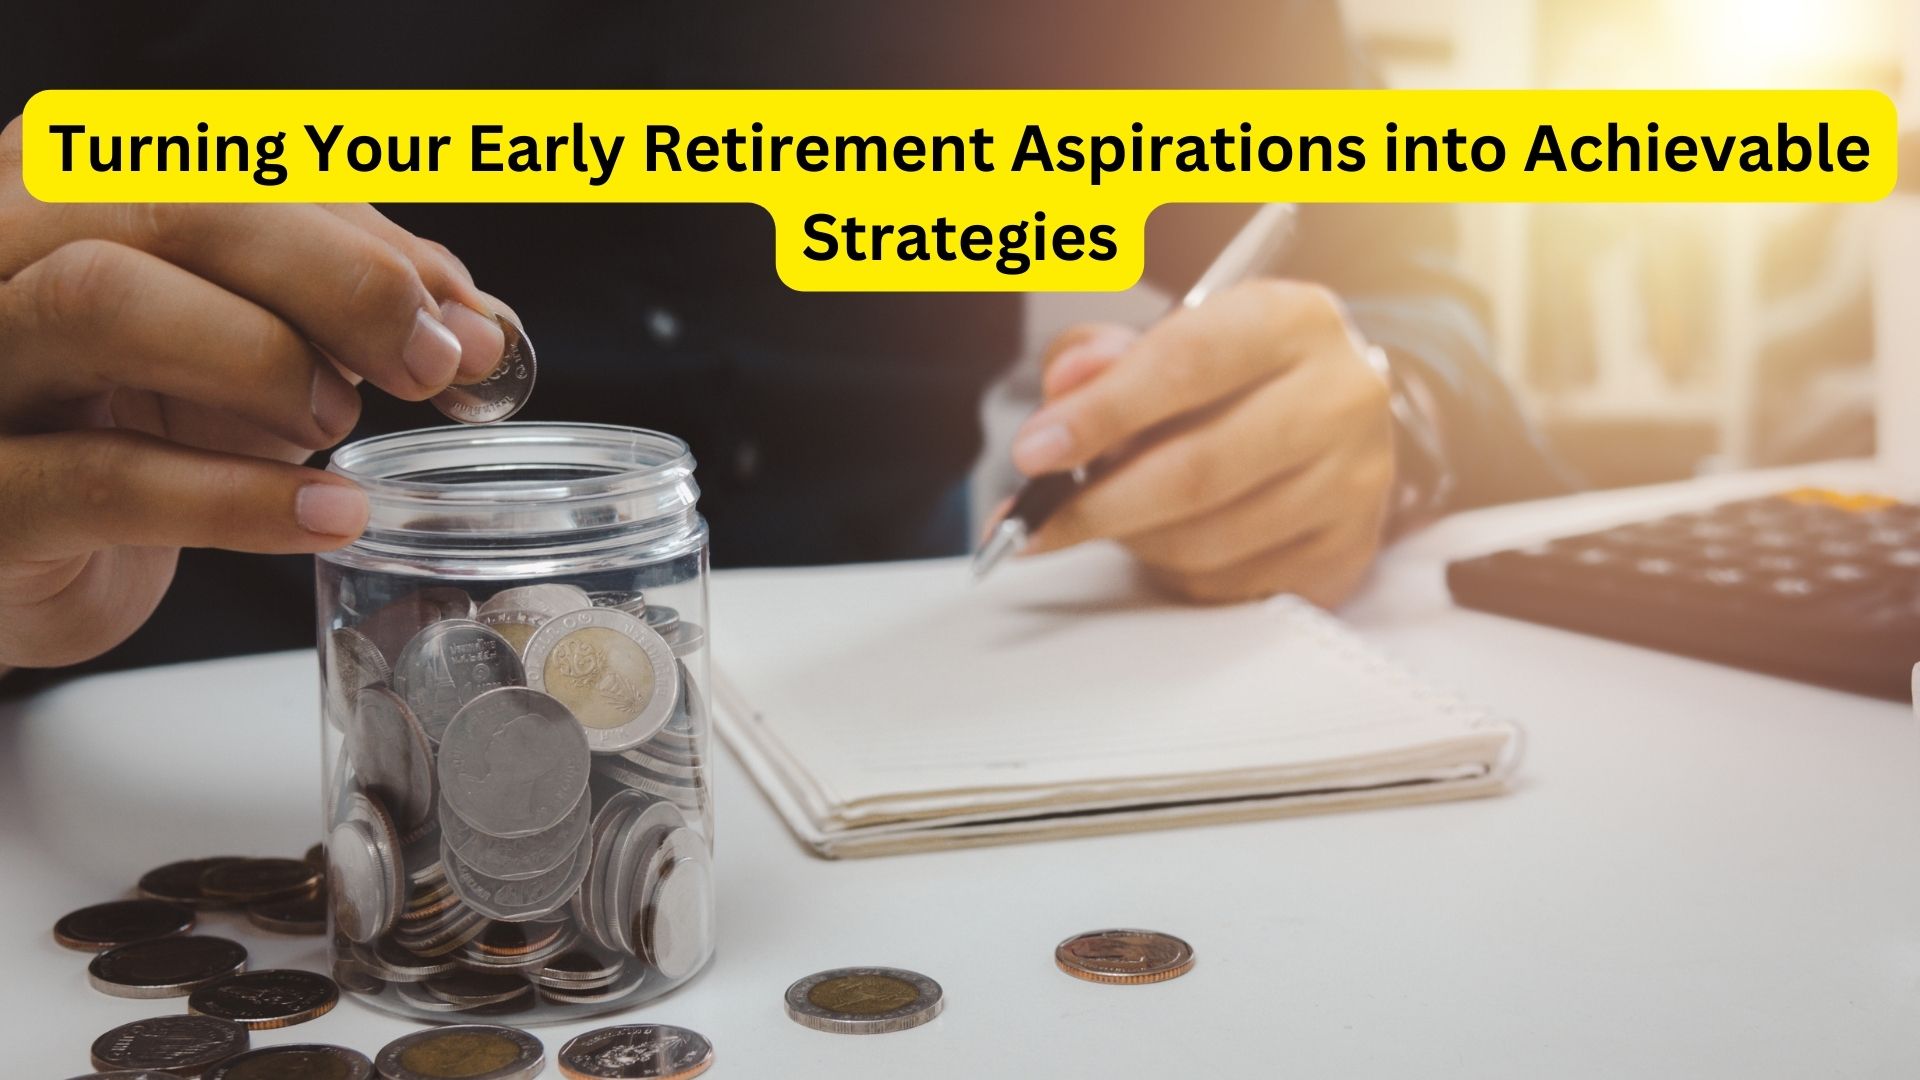 Turning Your Early Retirement Aspirations into Achievable Strategies